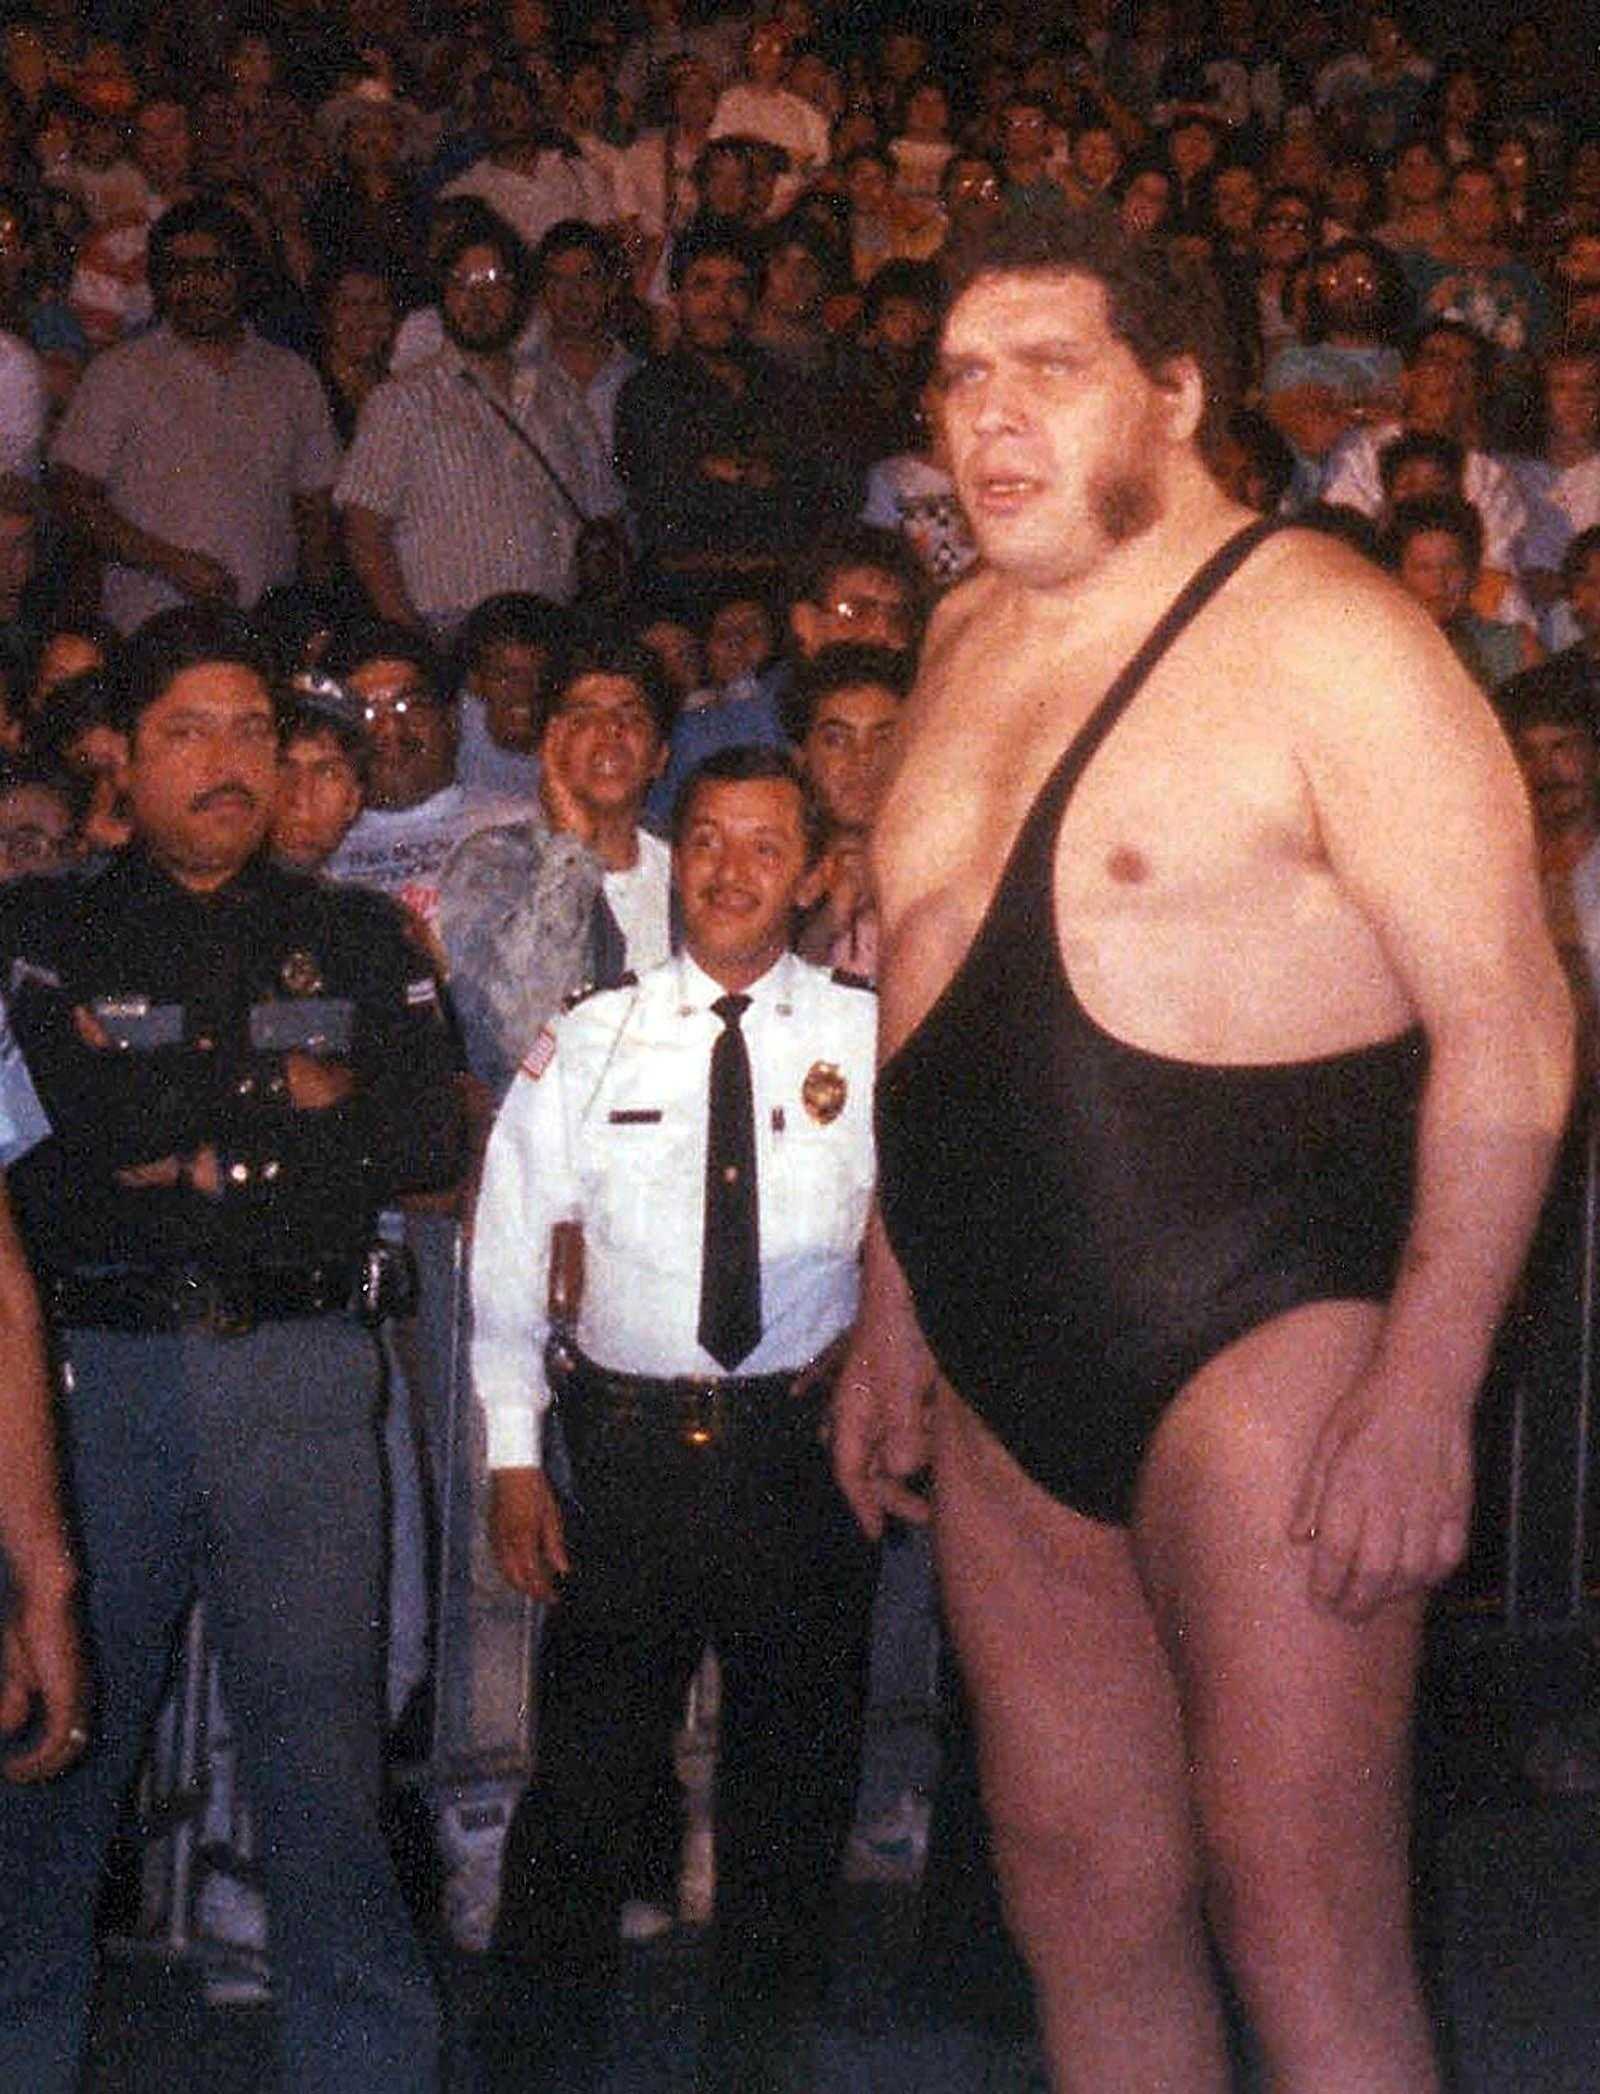 André the Giant in the late 80s